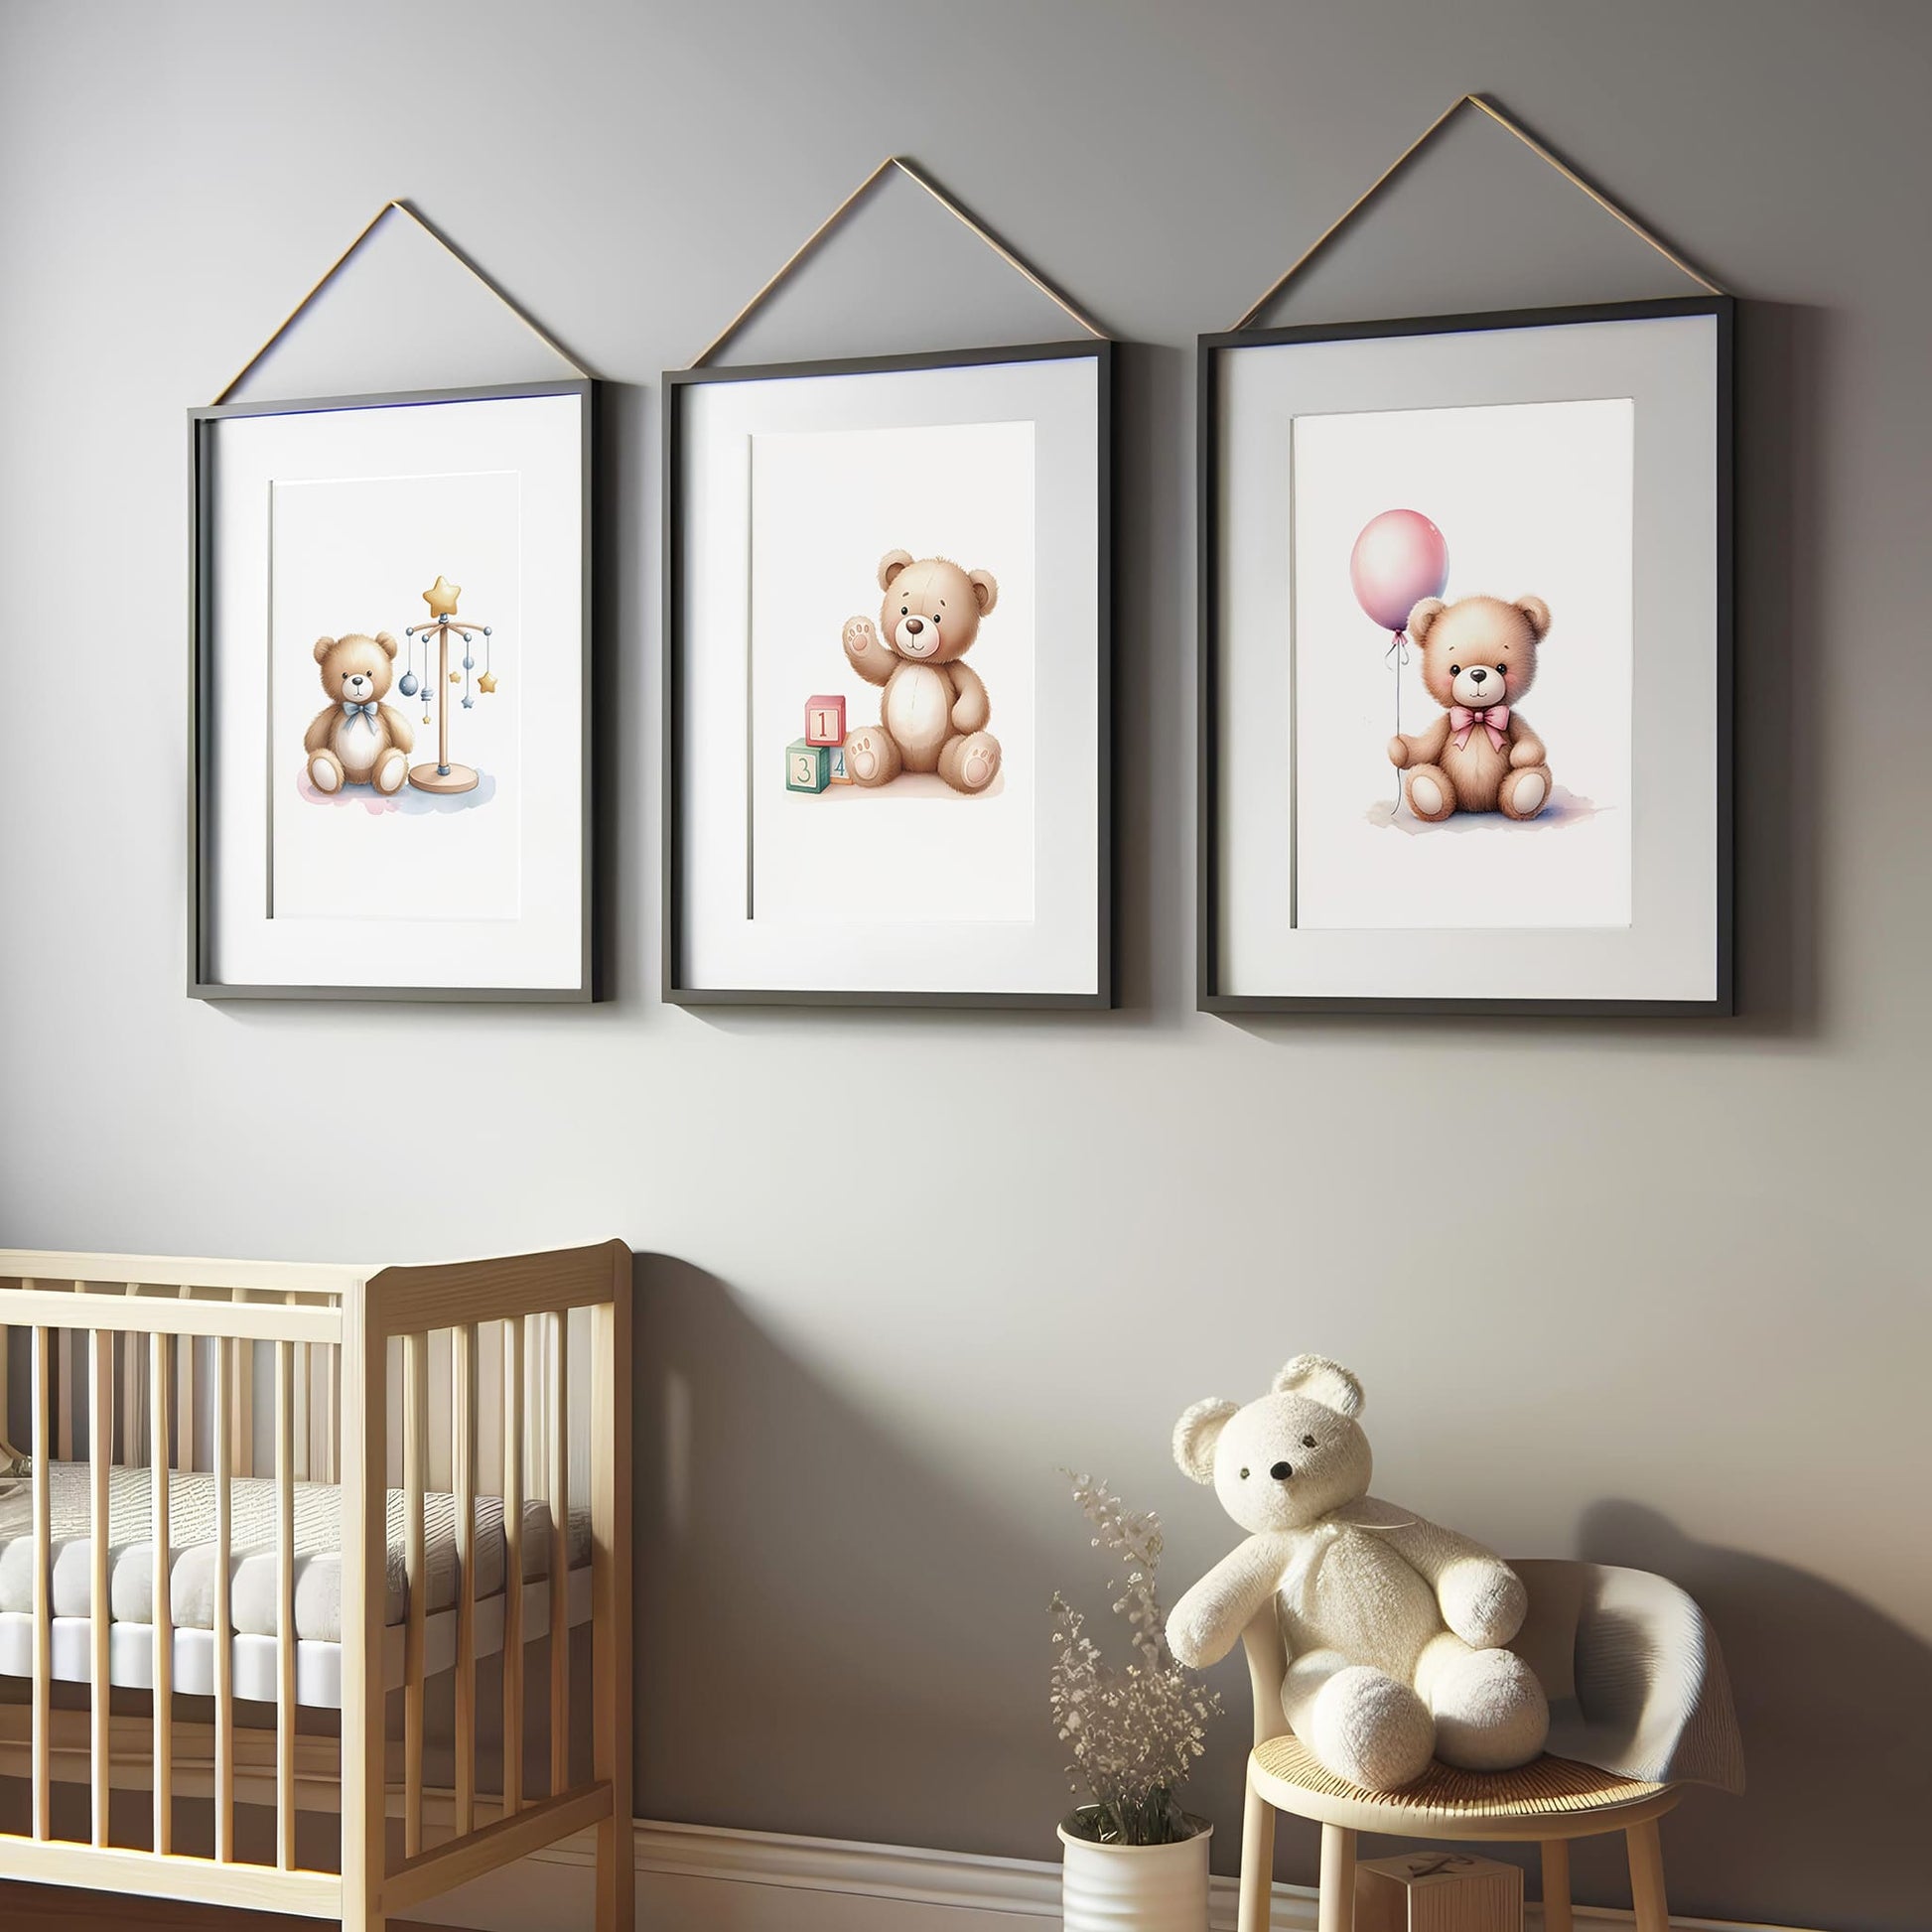 Set of three A4 prints in watercolour style. Each print depicts a teddy bear in a different scene: one teddy bear is holding a balloon, another is surrounded by counting blocks, and the third is near a mobile.